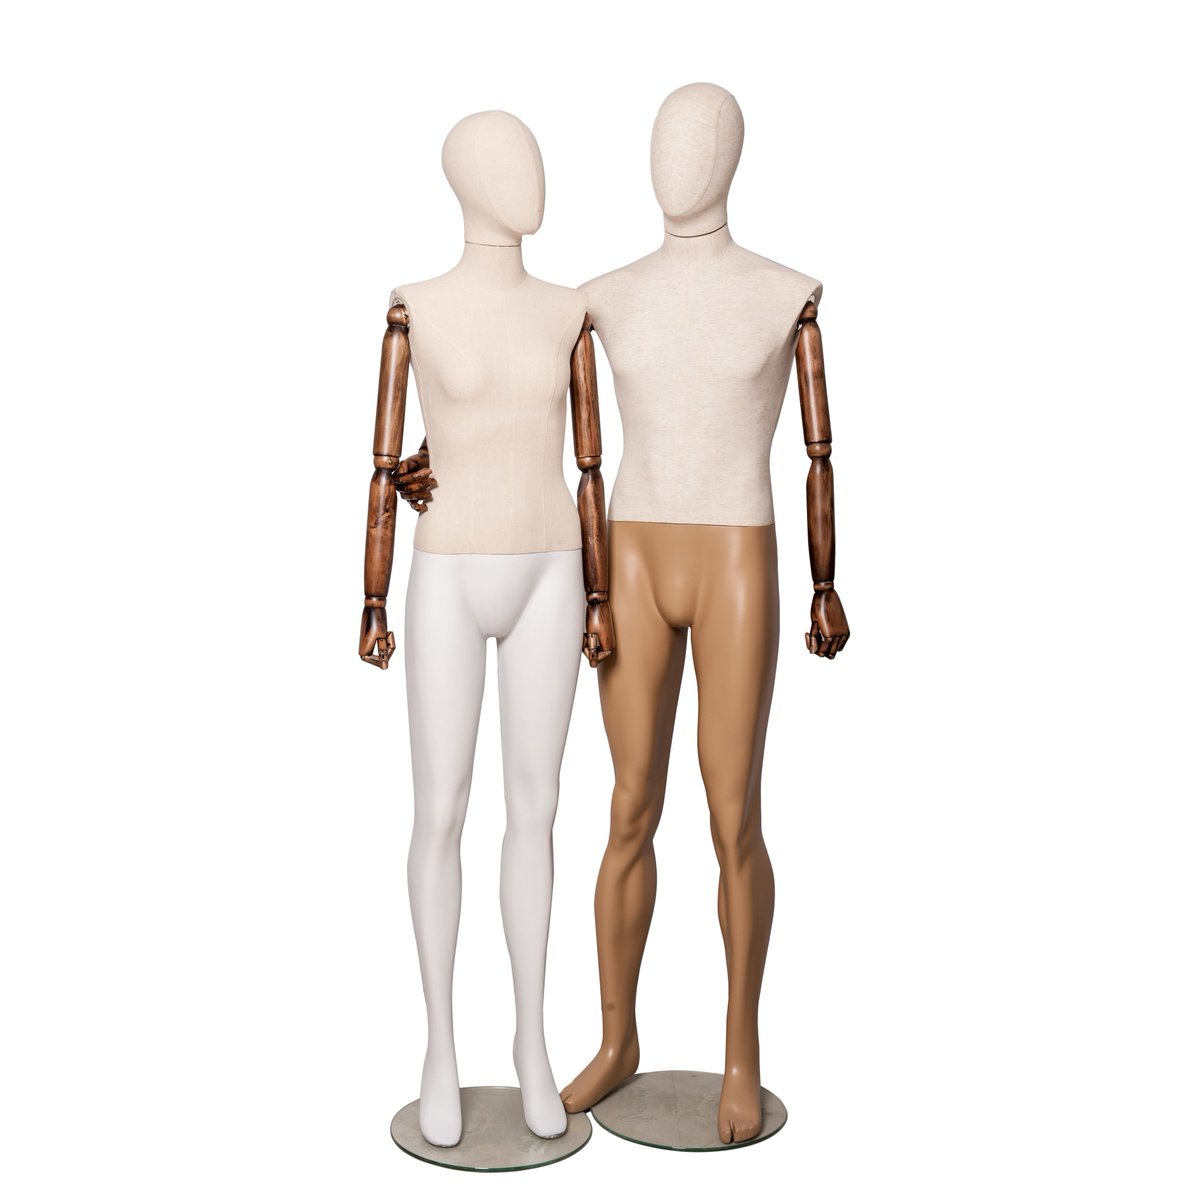 Fabric mannequin wood arms with movable head

#mannequins #fabricmannequin #shopdesign #display #windowdisplay #vm #design #fashion #femalemannequin #designweek